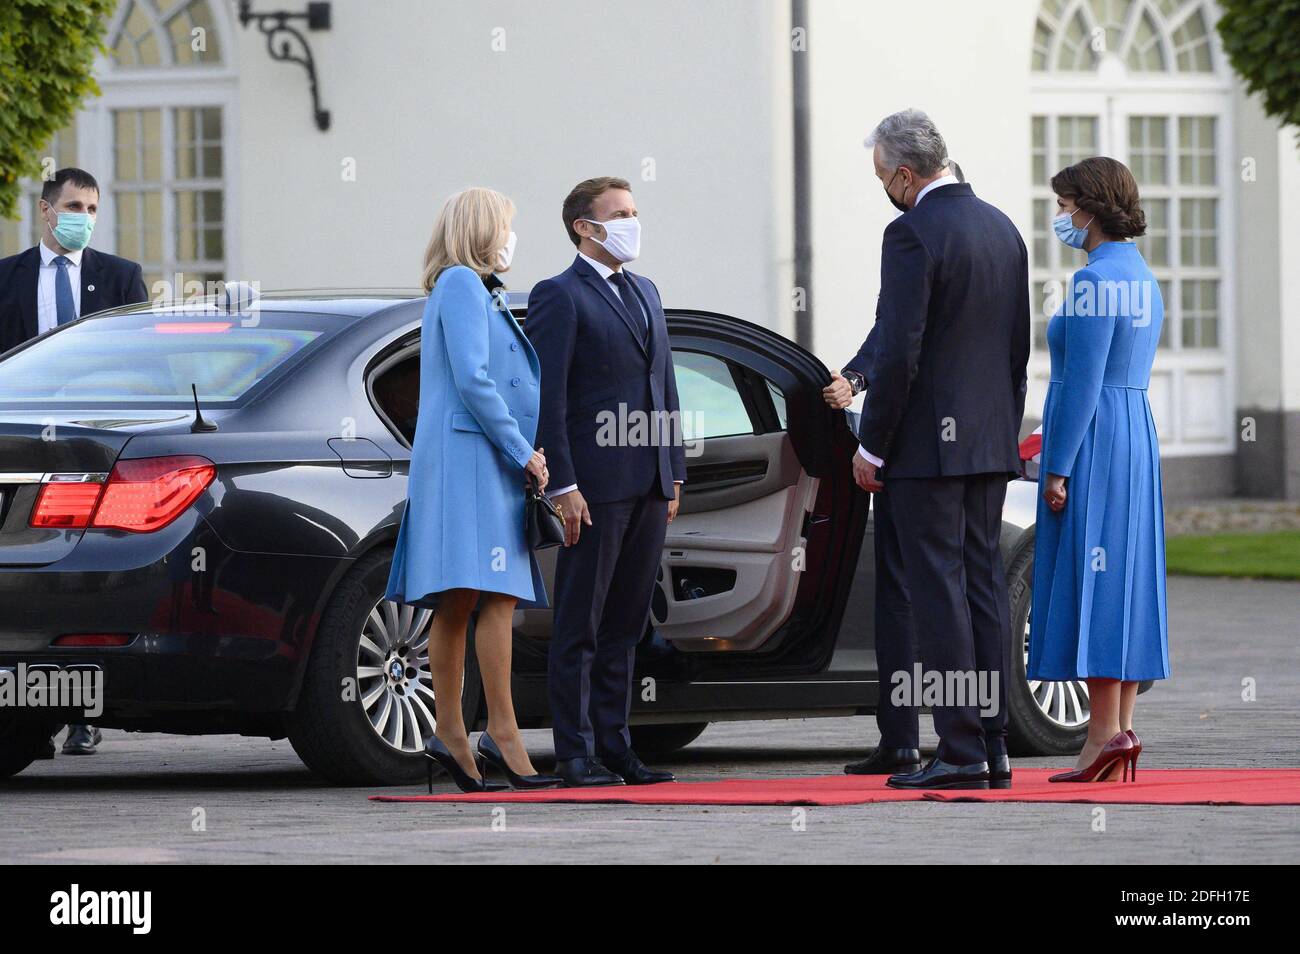 French President Emmanuel Macron and his wife Brigitte are welcomed by Lithuania's President Gitanas Nauseda and his wife Diana Nausediene as they arrive at the Presidential Palace in Vilnius, Lithuania on September 28, 2020. Photo by Eliot Blondet/ABACAPRESS.COM Stock Photo